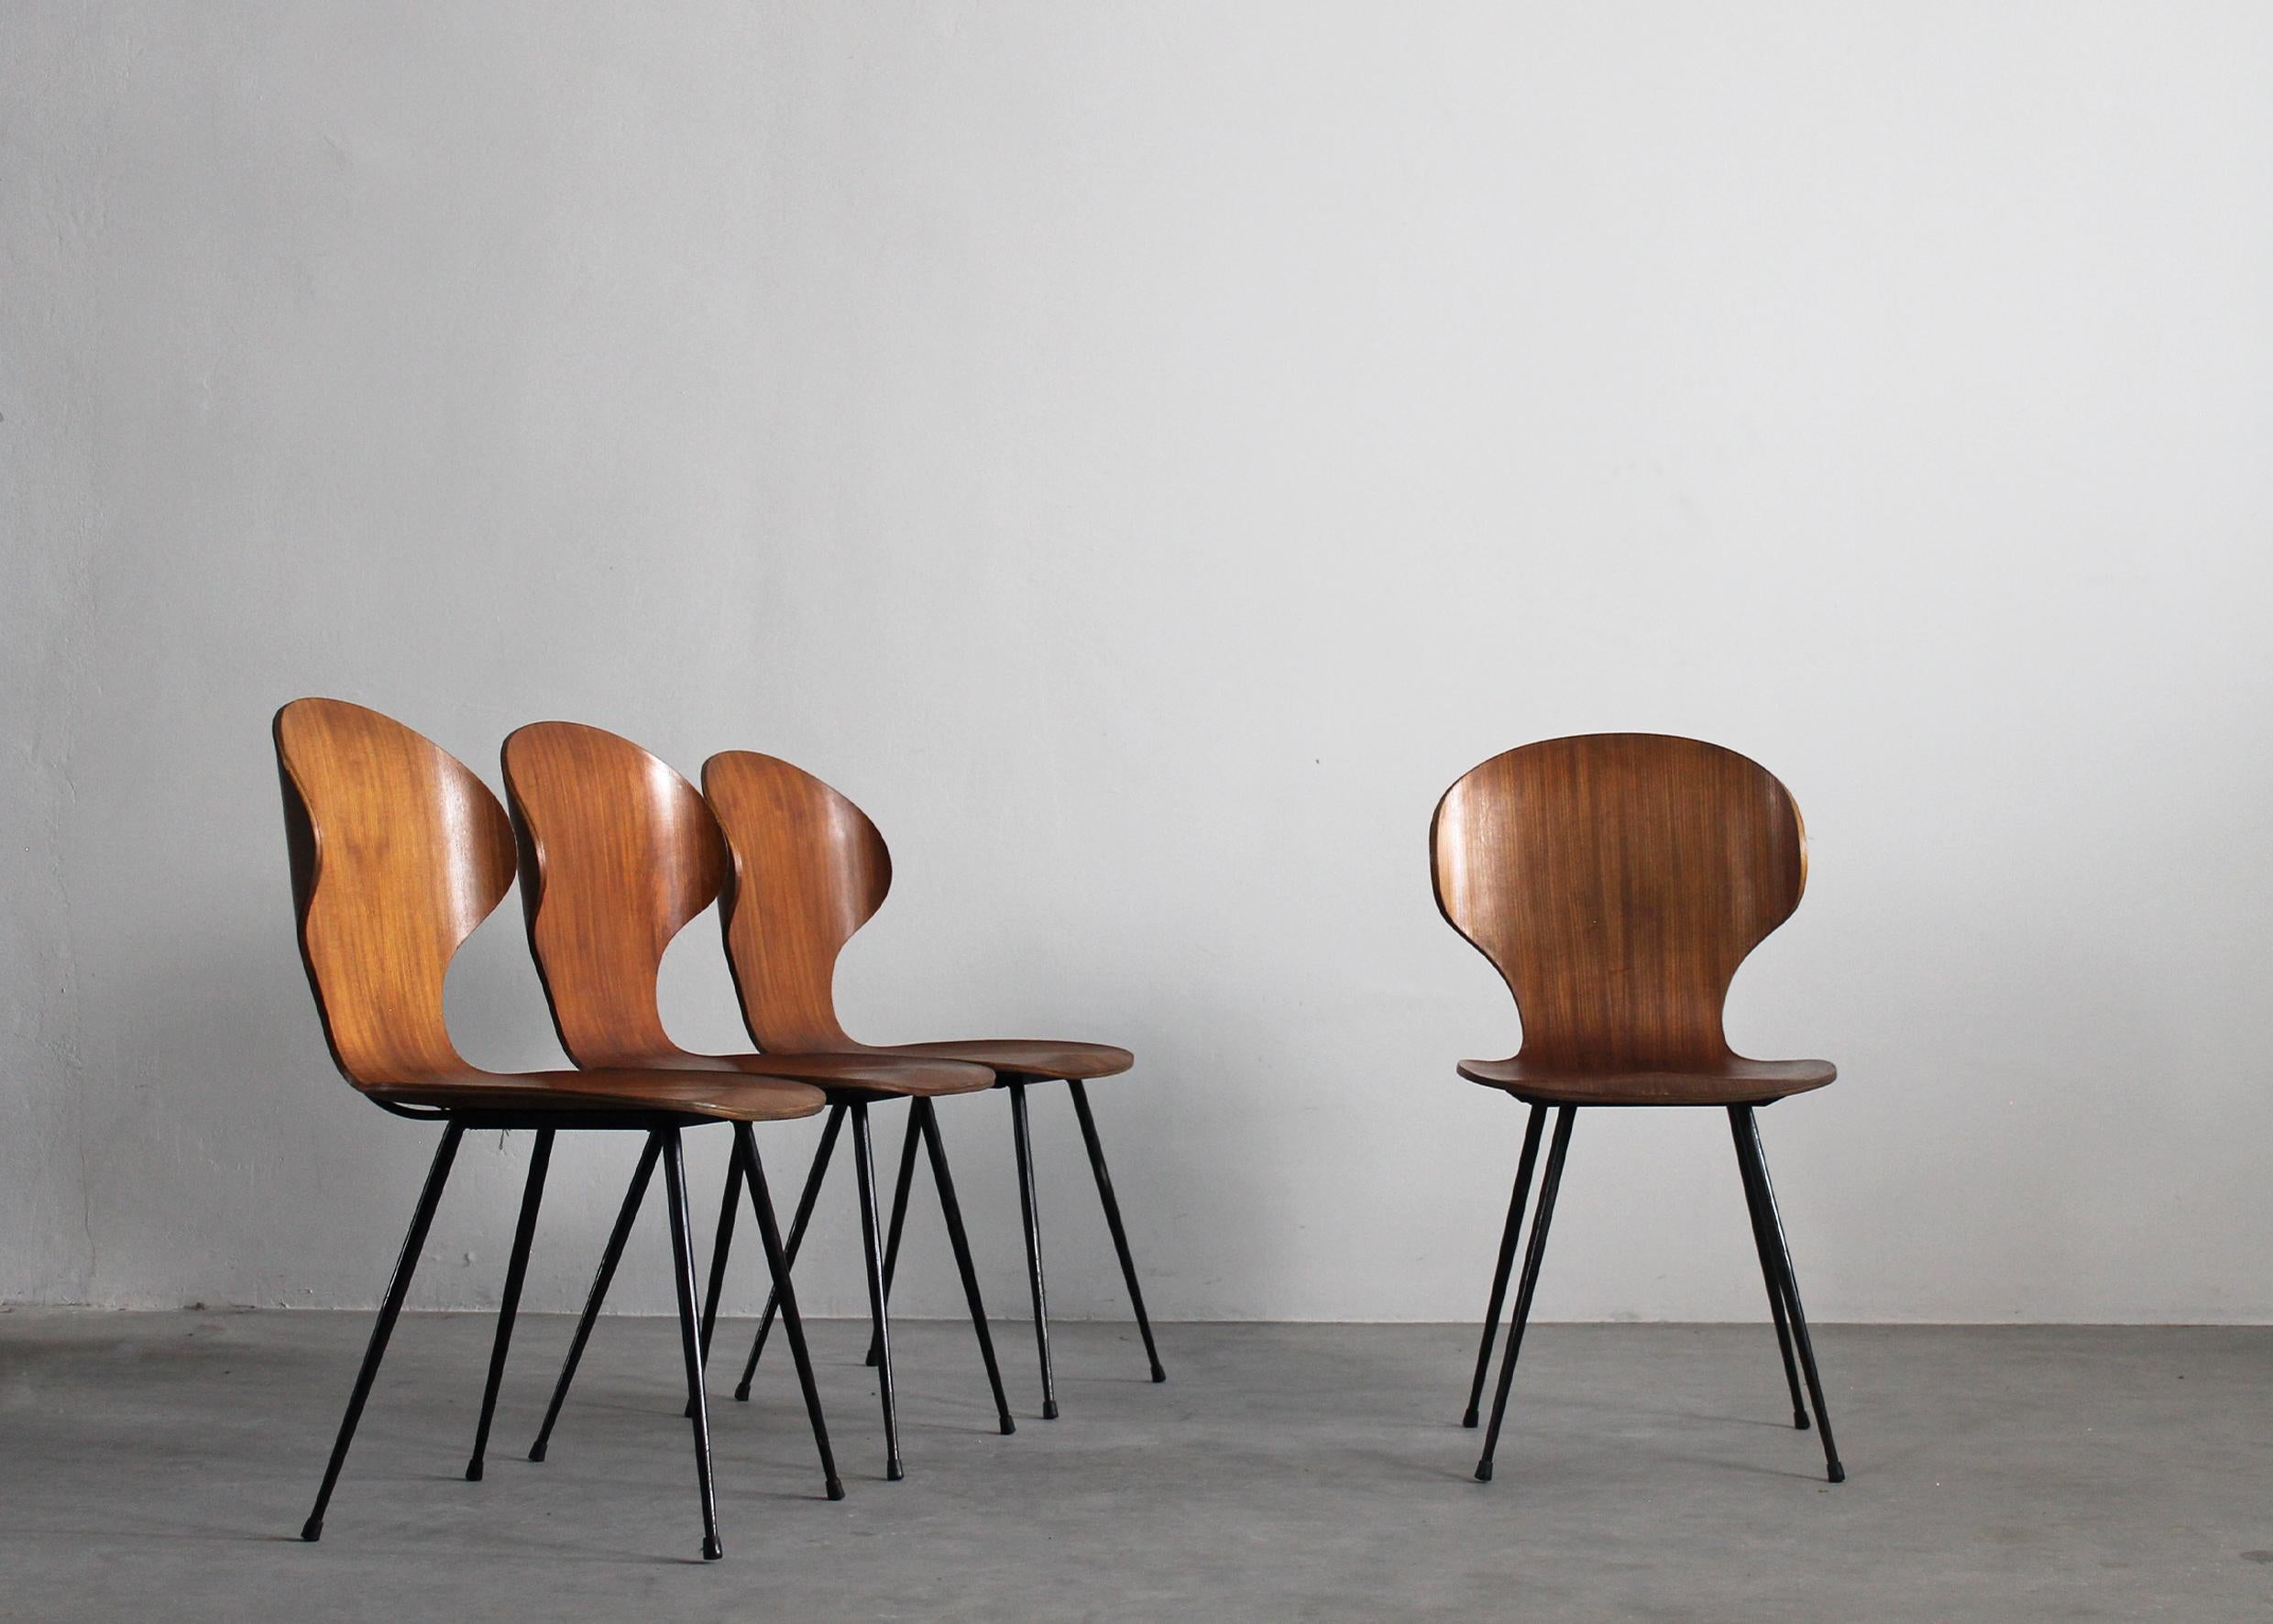 Set of four Lulli dining chairs with black painted steel legs, back, and seat in curved and shaped veneered wood, designed by Carlo Ratti for ILC Lissone in 1950s.

In Italy, at the beginning of the XX century, industries of curved solid wood arose